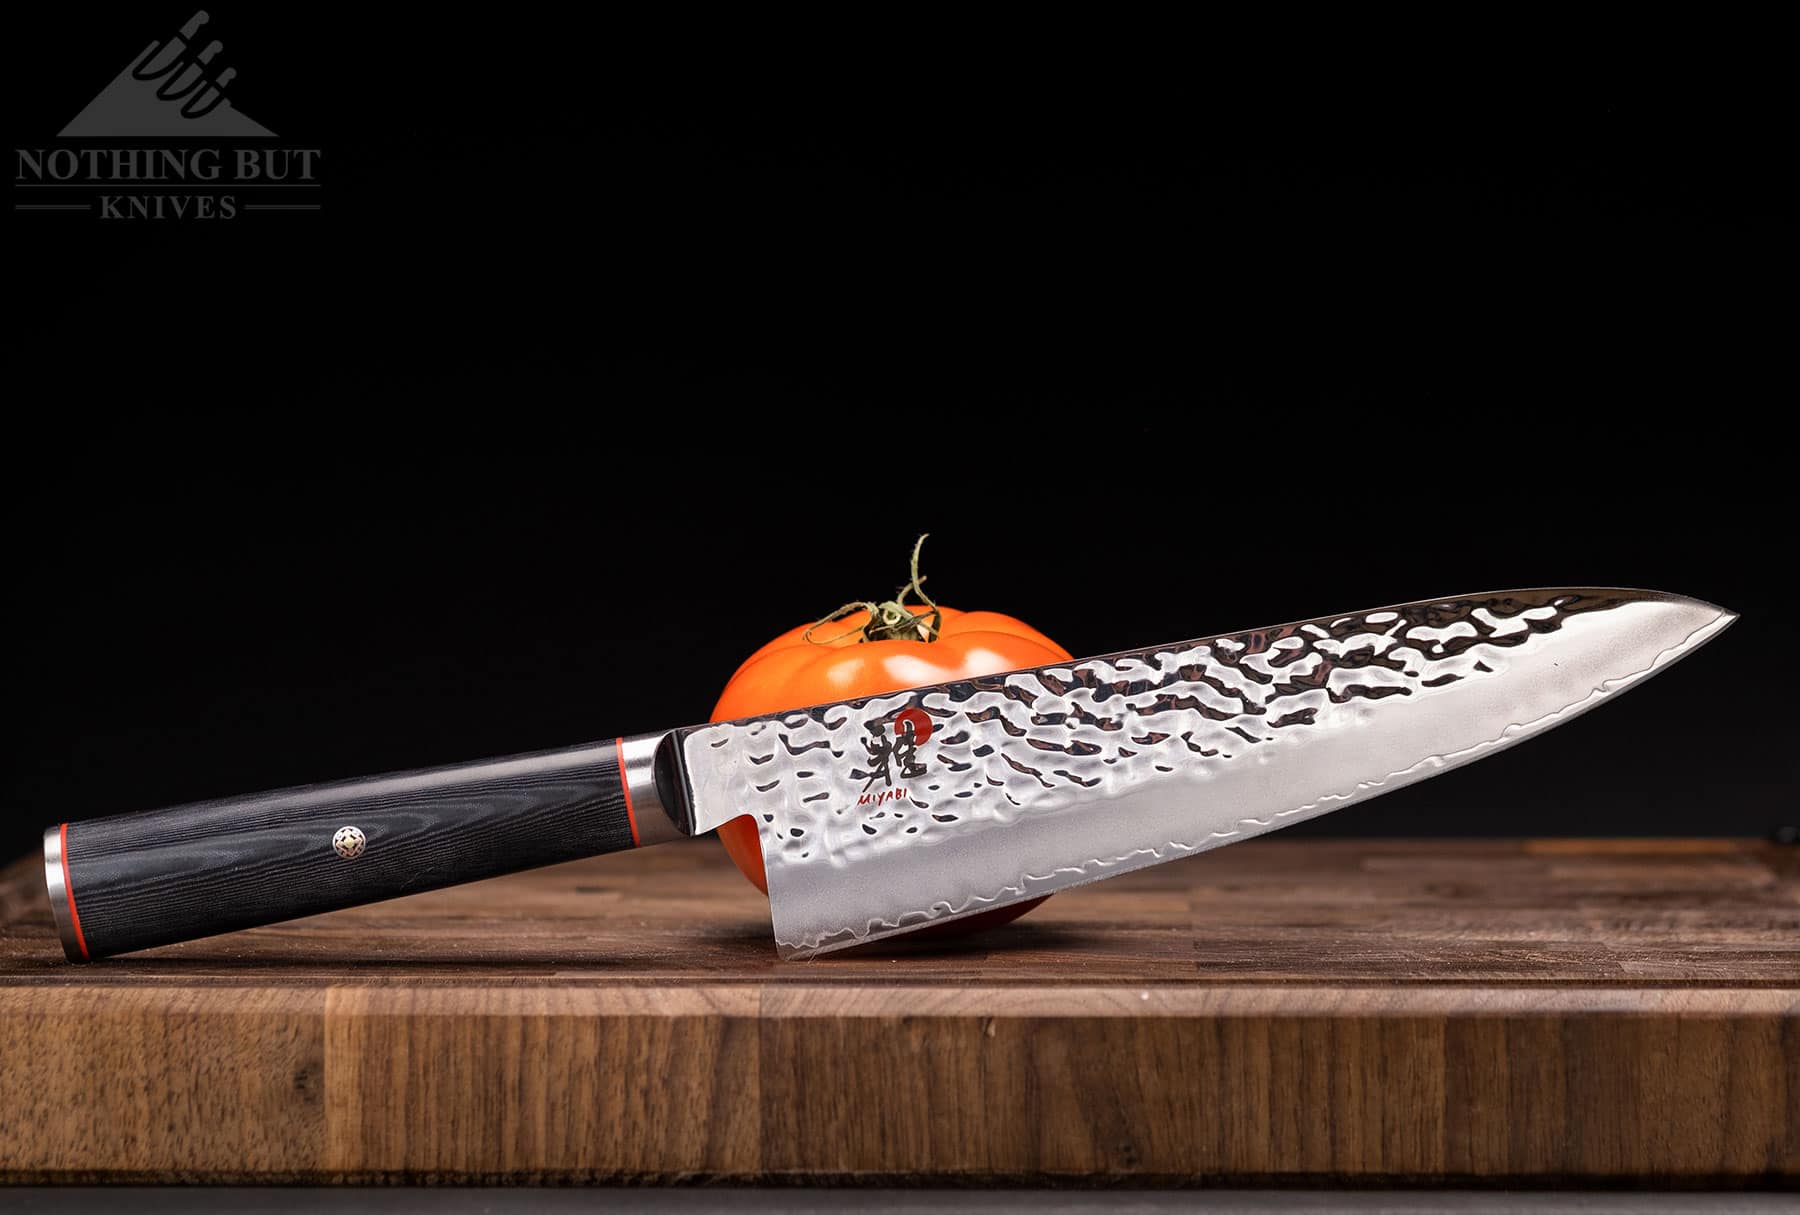 The fit and finish of the Miyabi Mizu SG2 chef knife is excellent. Everything seems to be perfectly rounded and pieced together right out of the box.